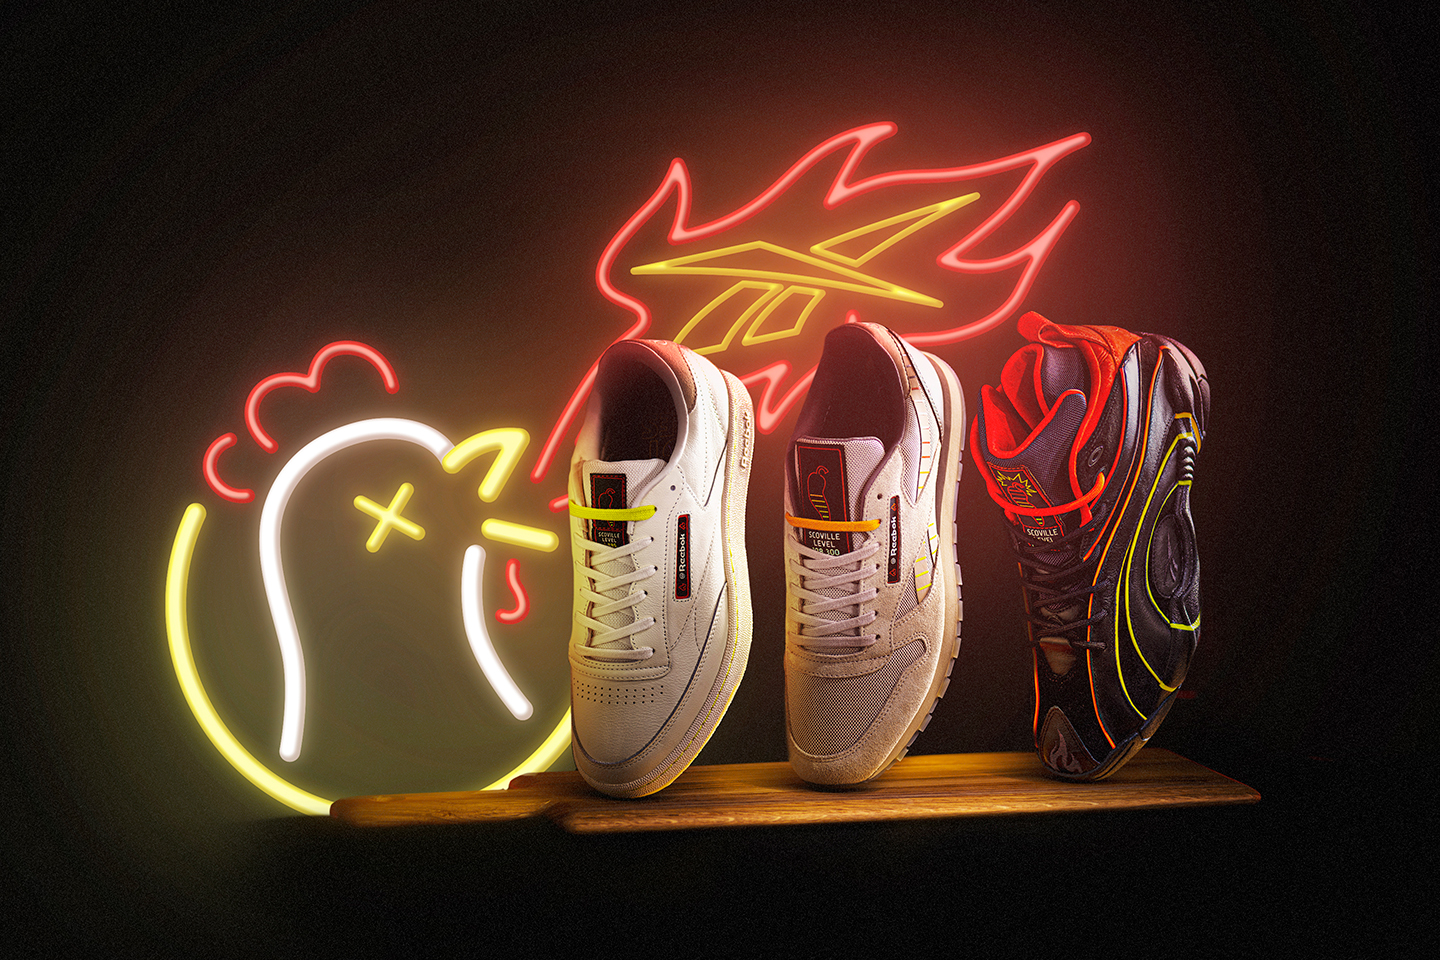 Reebok x Hot Ones Team Up For Creative 3-Piece Sneaker Collab